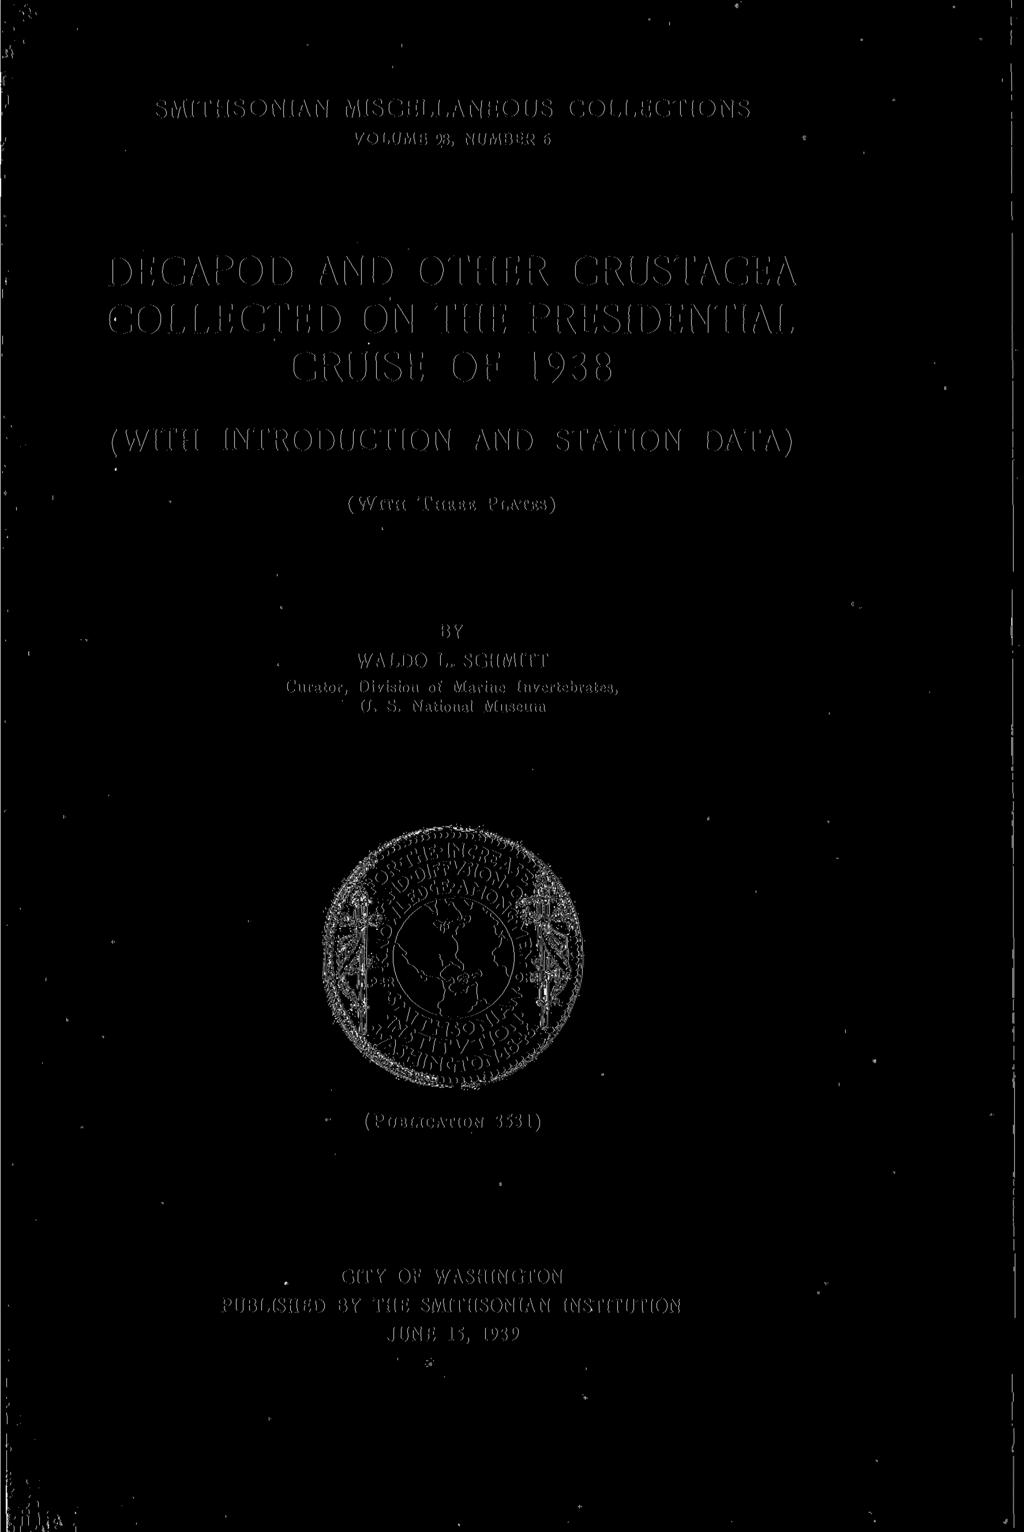 SMITHSONIAN MISCELLANEOUS COLLECTIONS VOLUME 98, NUMBER 6 DECAPOD AND OTHER CRUSTACEA COLLECTED ON THE PRESIDENTIAL CRUISE OF 1938 (WITH INTRODUCTION AND STATION DATA) (WITH THREE